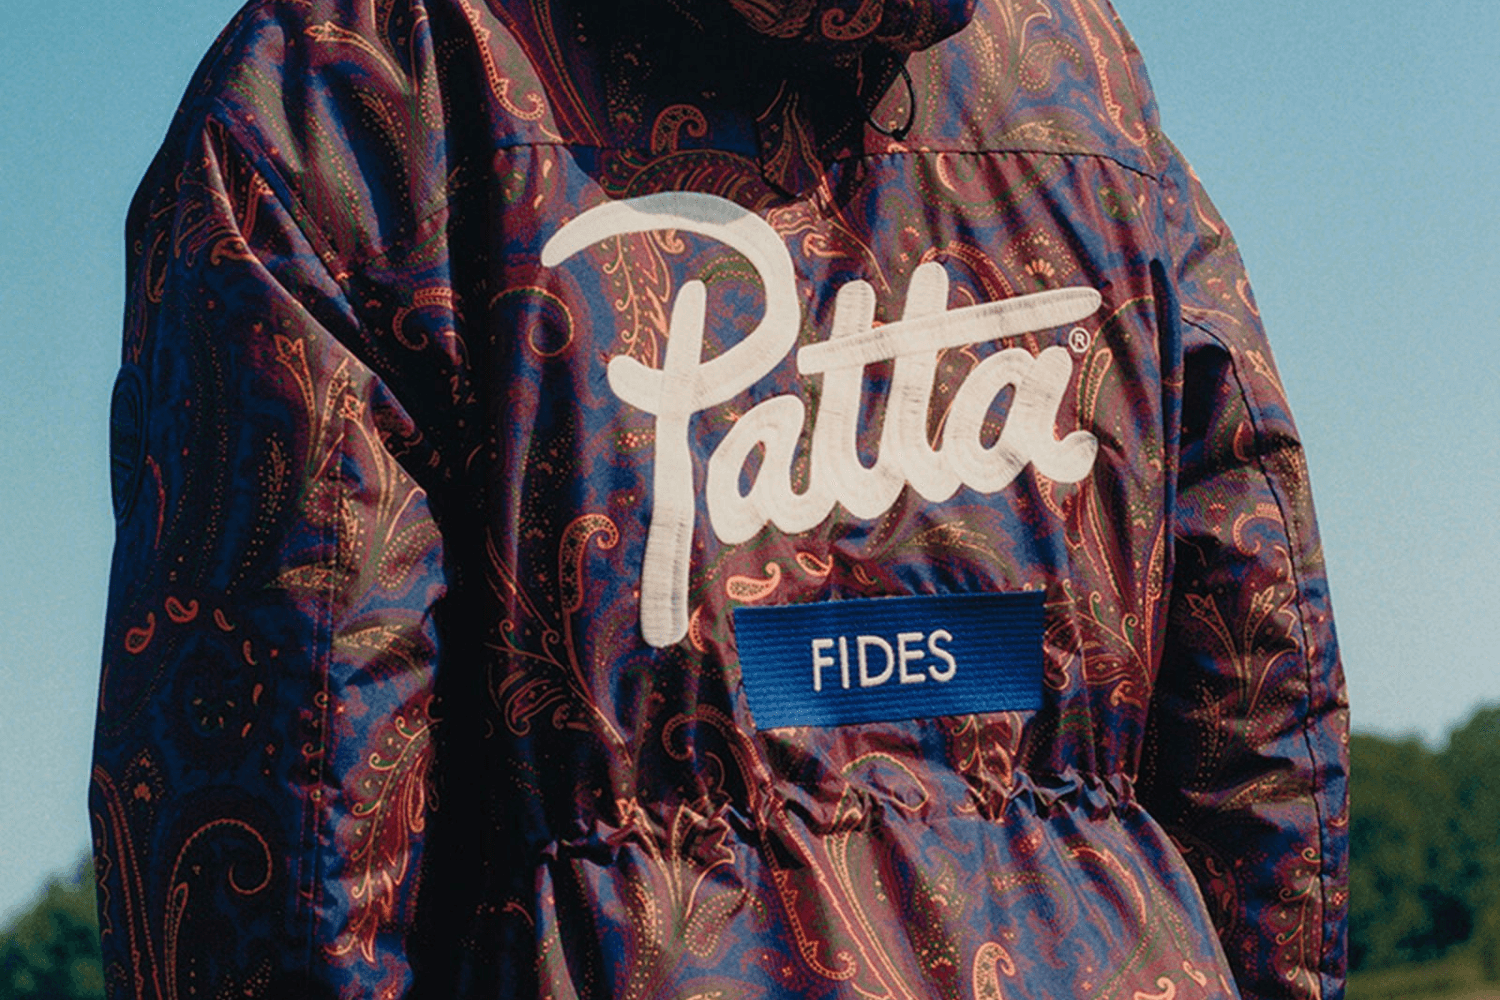 Part two of the Patta x Napa collection